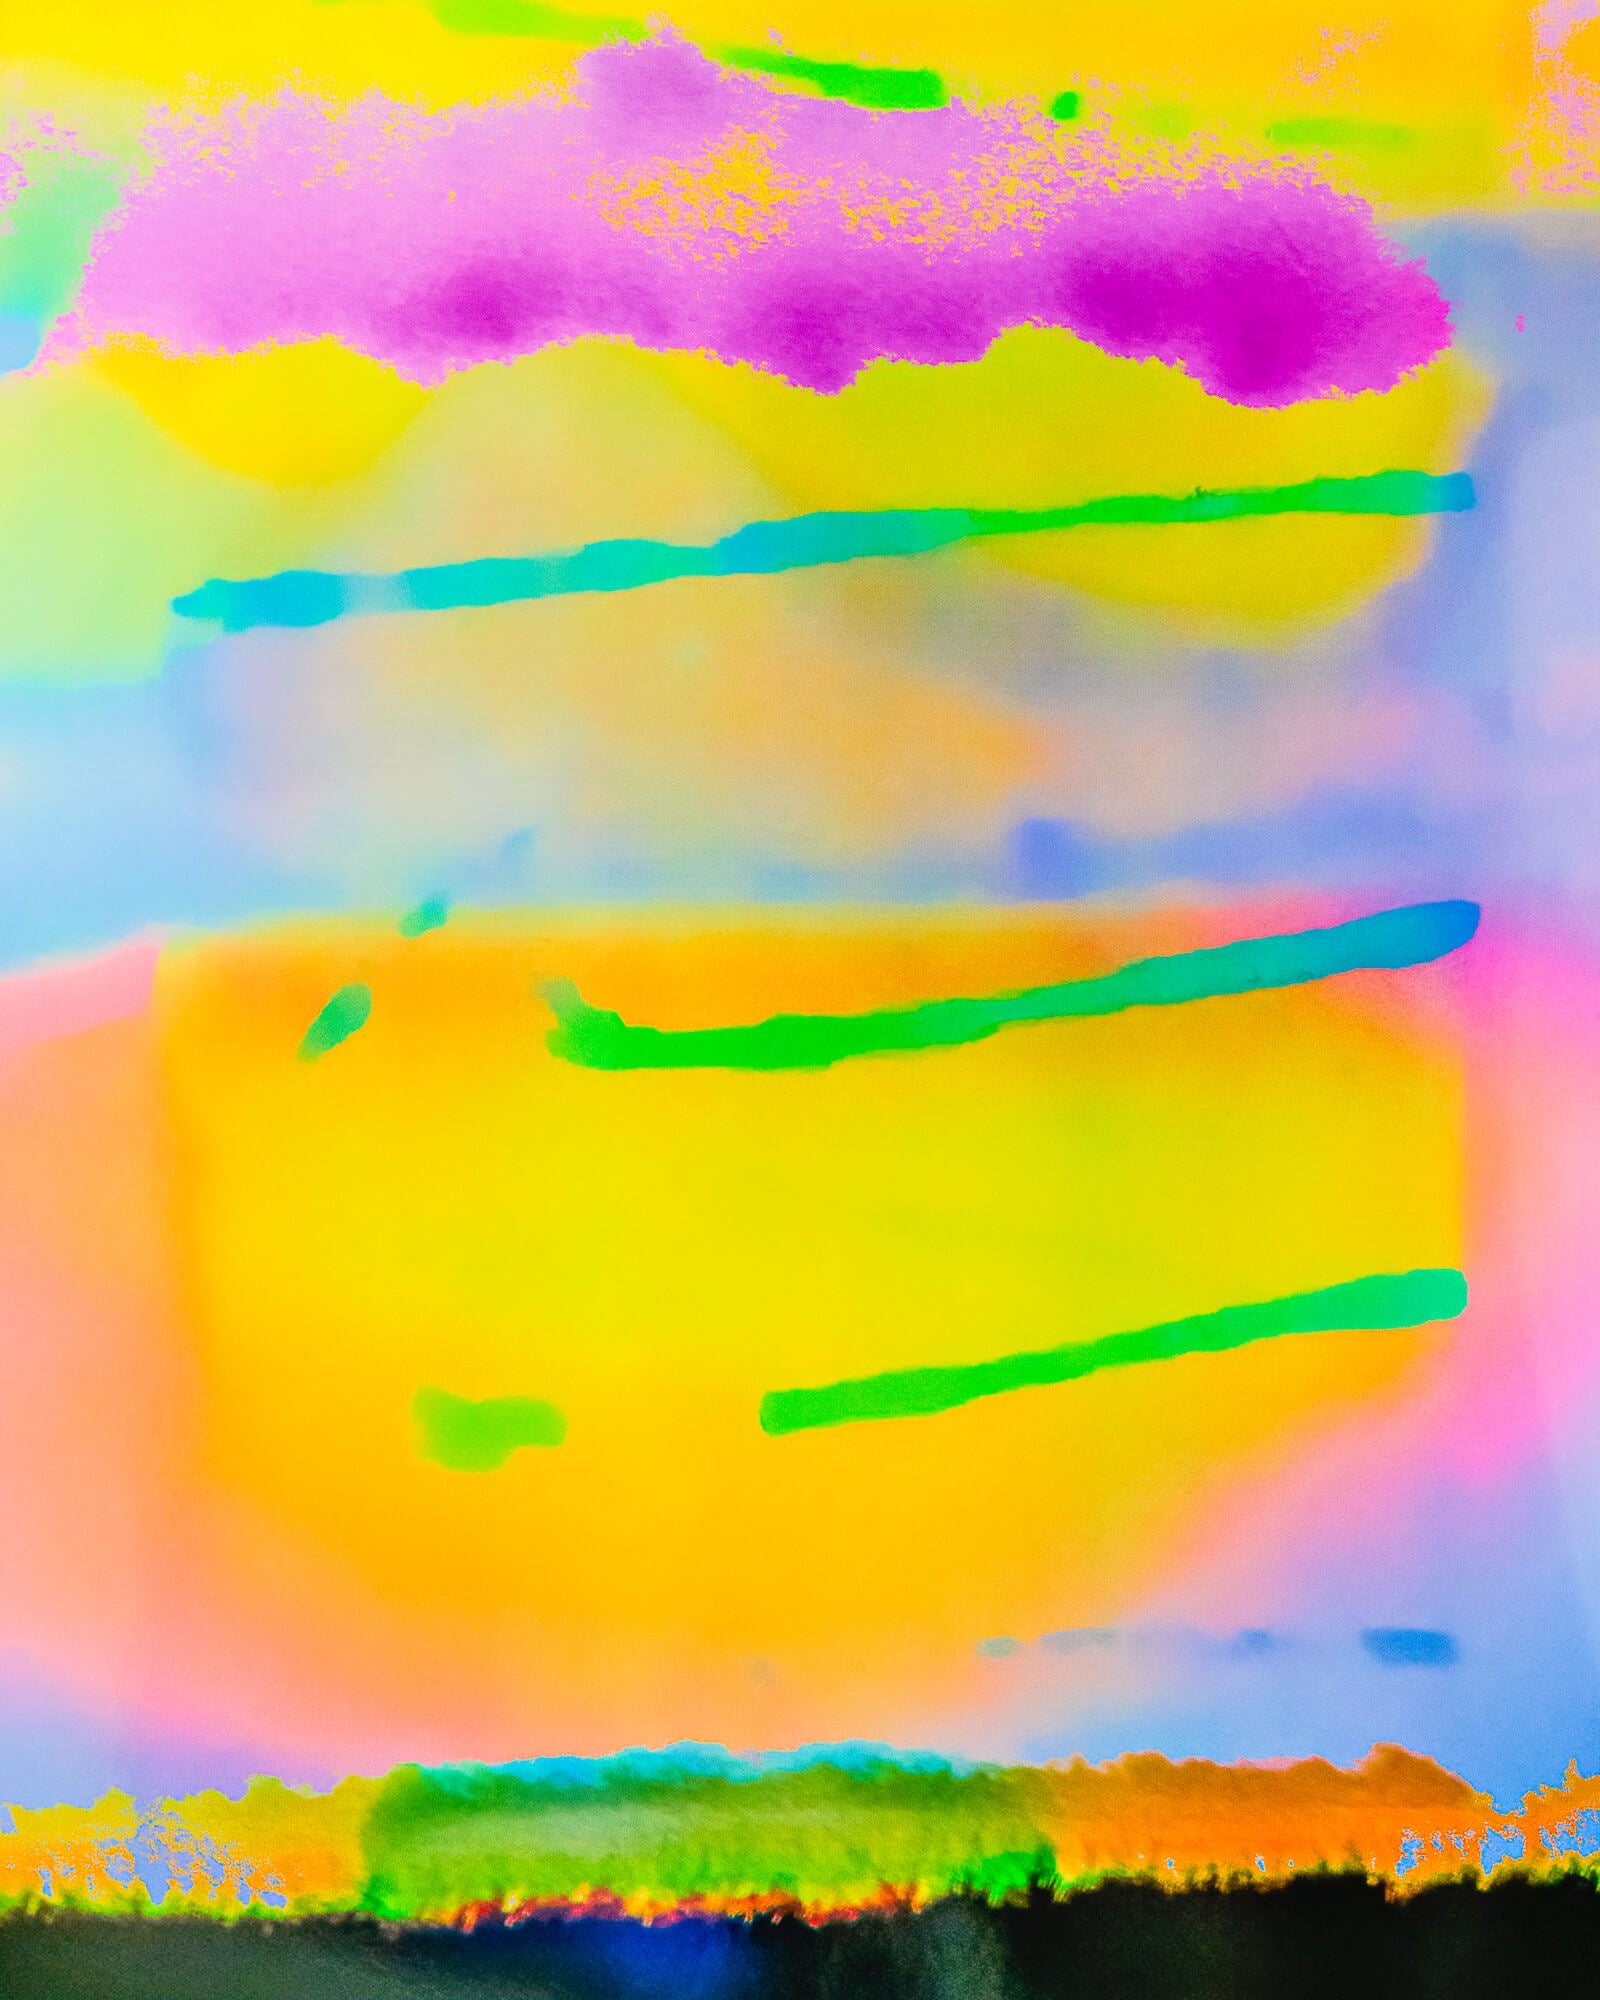 The image displays "Raising Energy !!," an artwork vibrant with bright, bold colours. The top features a swath of vivid pink, below which layers of yellow, green, and blue bands stretch horizontally across the piece. These energetic stripes are set against a glowing orange backdrop, suggesting a mix of emotions through colour. At the bottom, a burst of darker colours grounds the composition. The piece exudes a sense of motion and the courage to find joy even in challenging times.